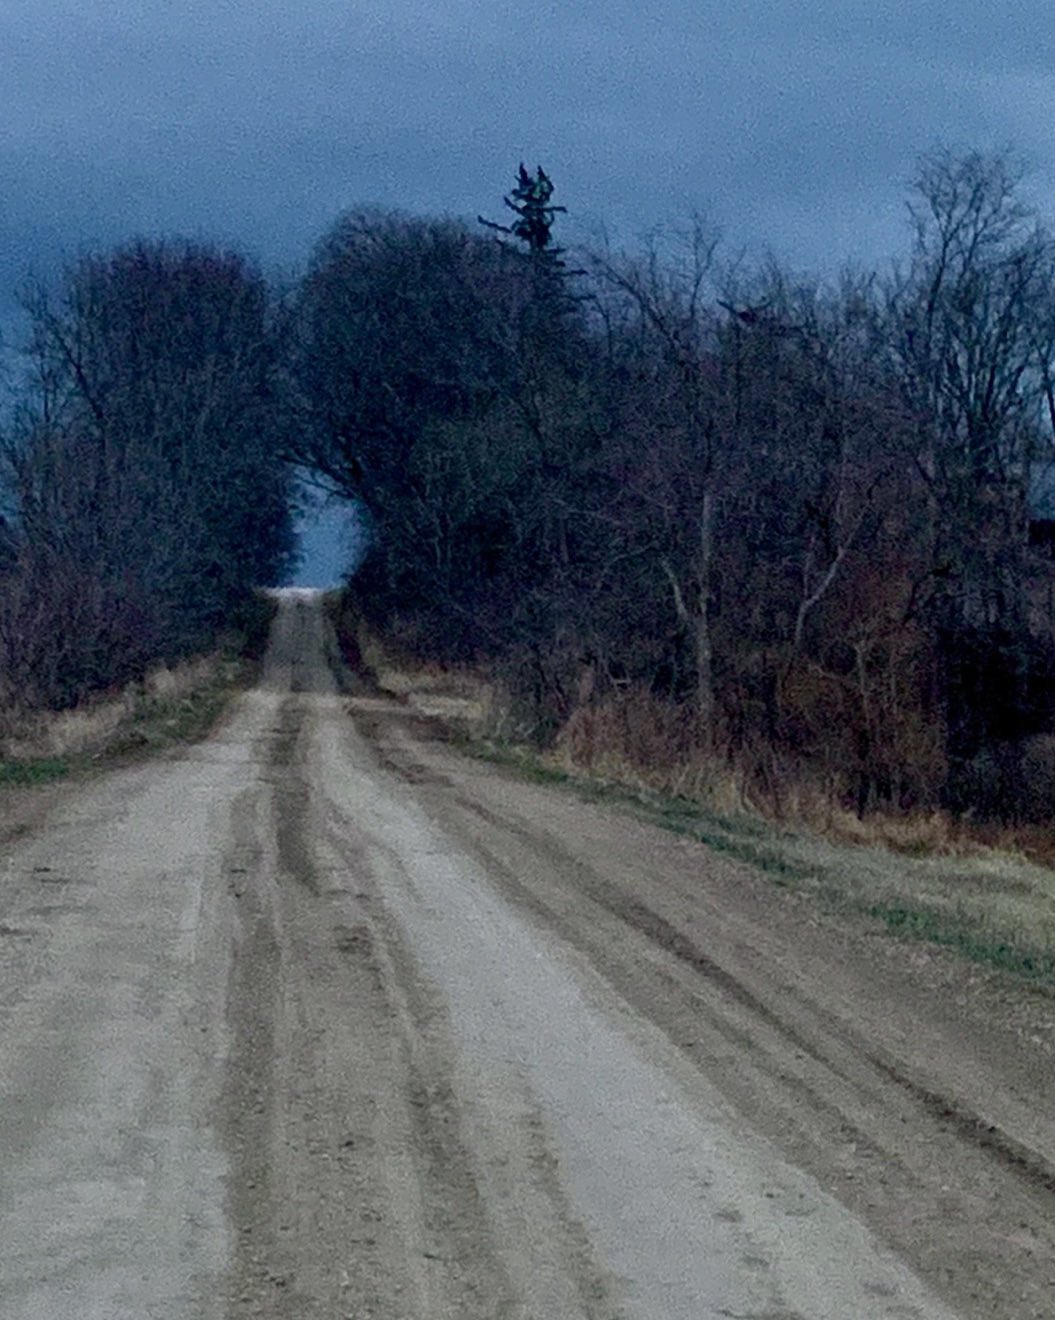 Rural road in eastern Iowa. We are staying at a Harvest Host site, Oak Tree Homes, in Wilton, Iowa. Flat, open country with beautiful forested accents, where there are homesteads. #harvesthosts #oaktreehomes #wiltonlowa #iowaphotographs #orcuttphotography